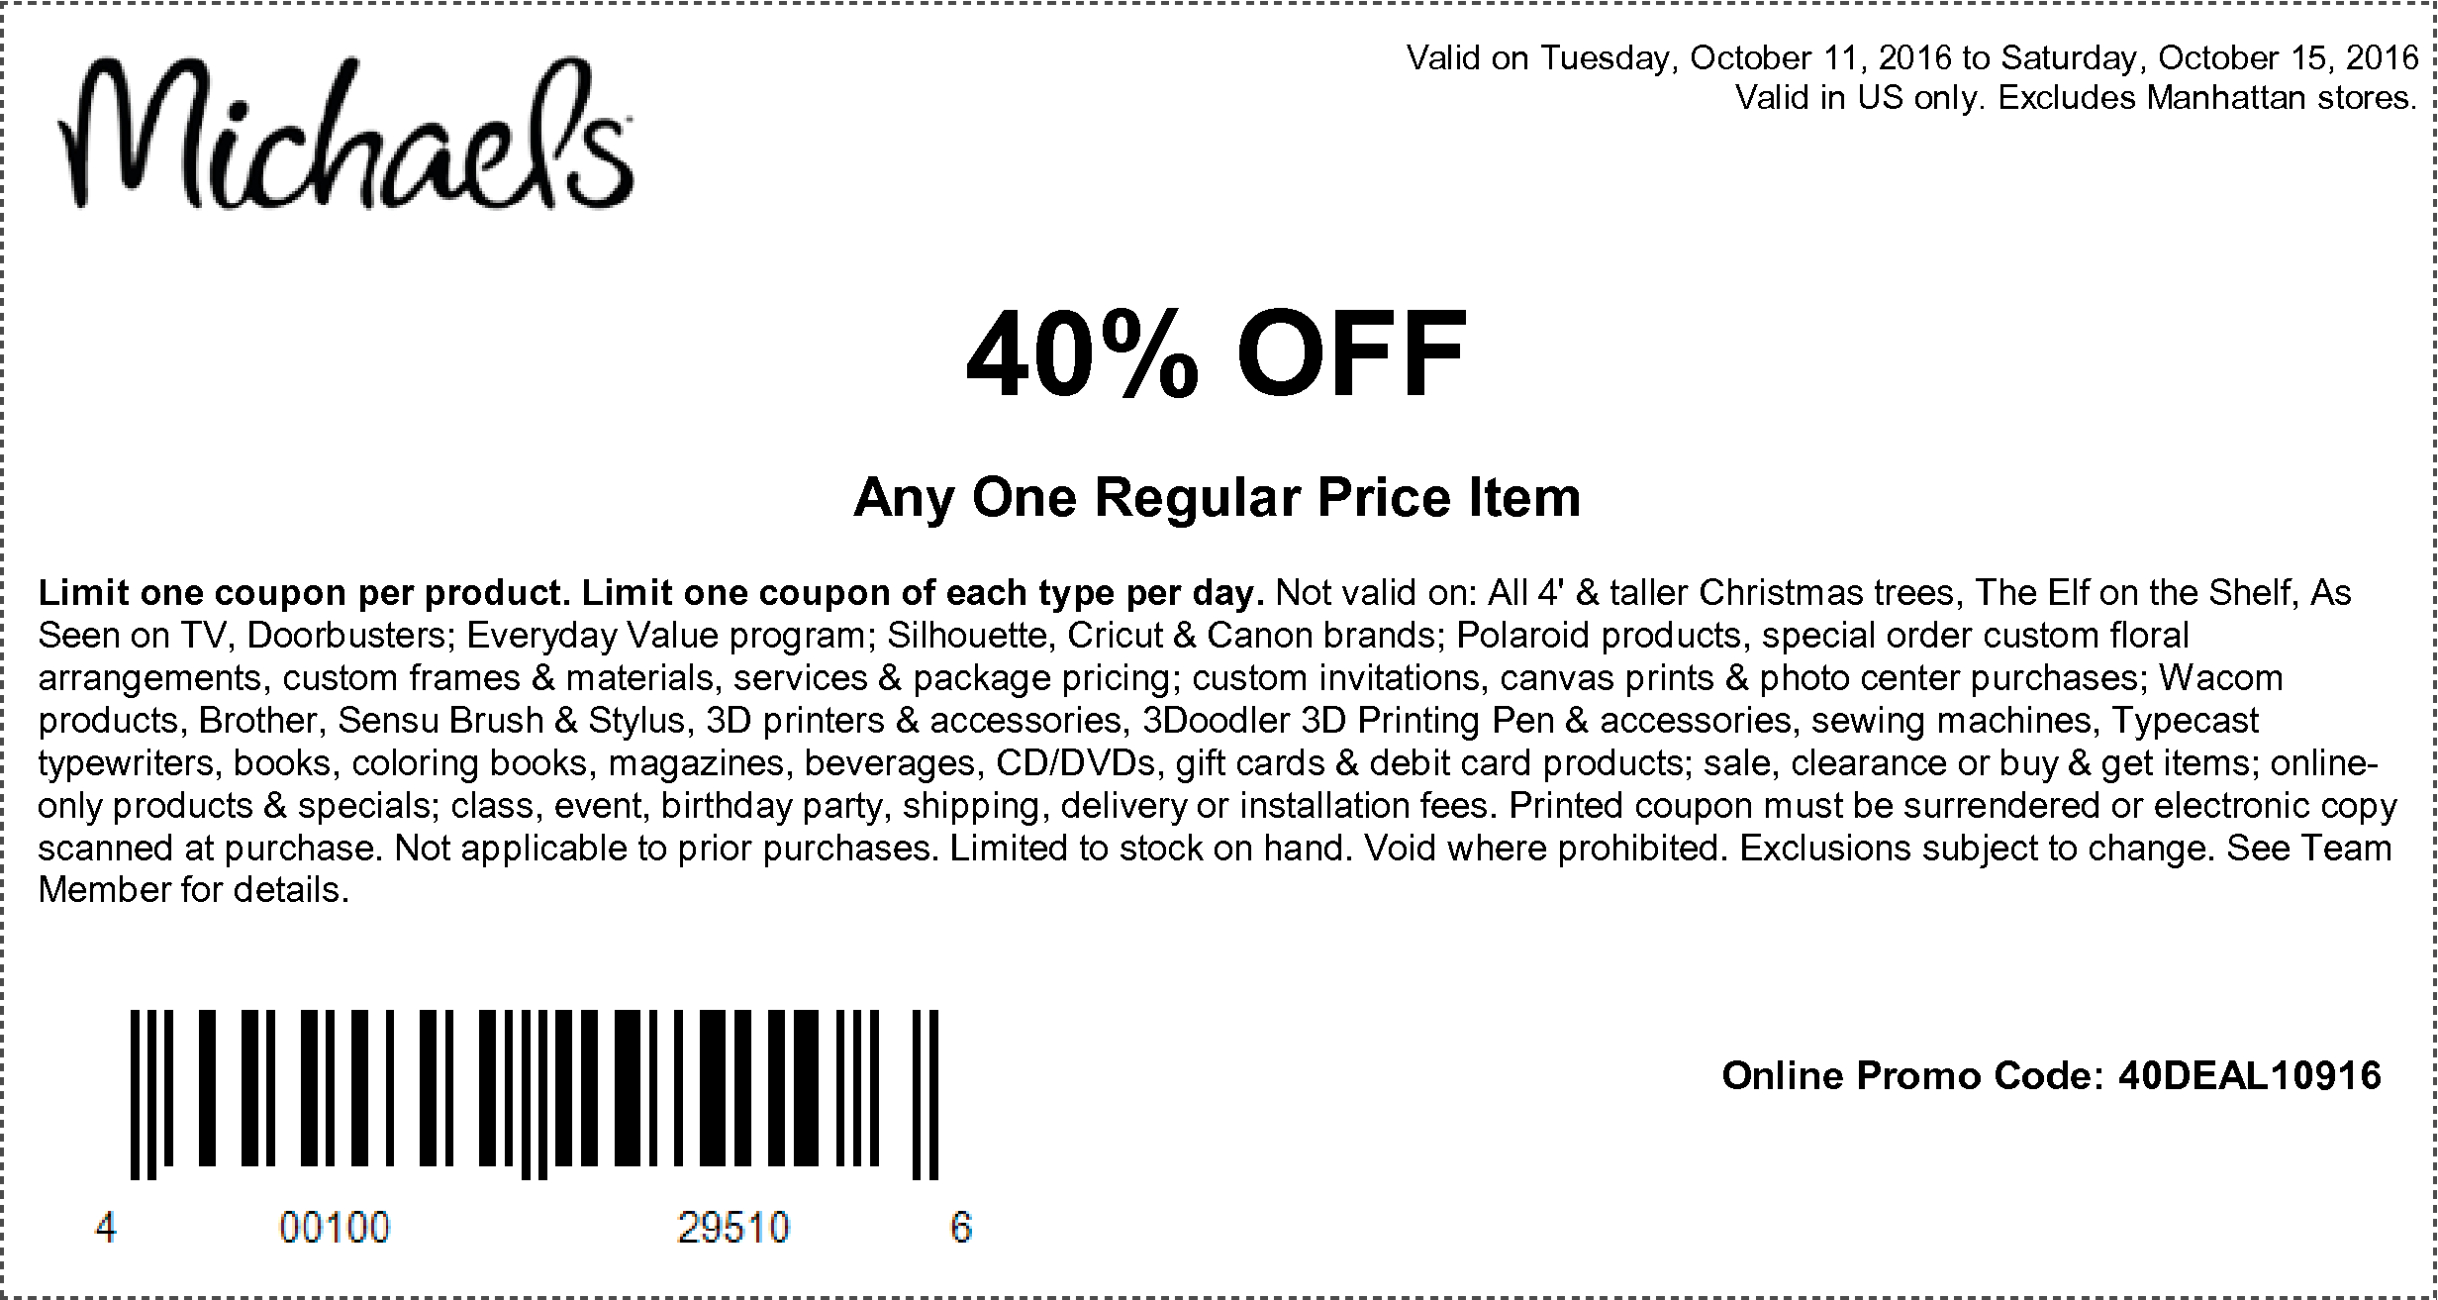 Coupons At Michaels | Coupons | Pinterest | Michaels Coupon, Coupons - Free Printable Michaels Coupons